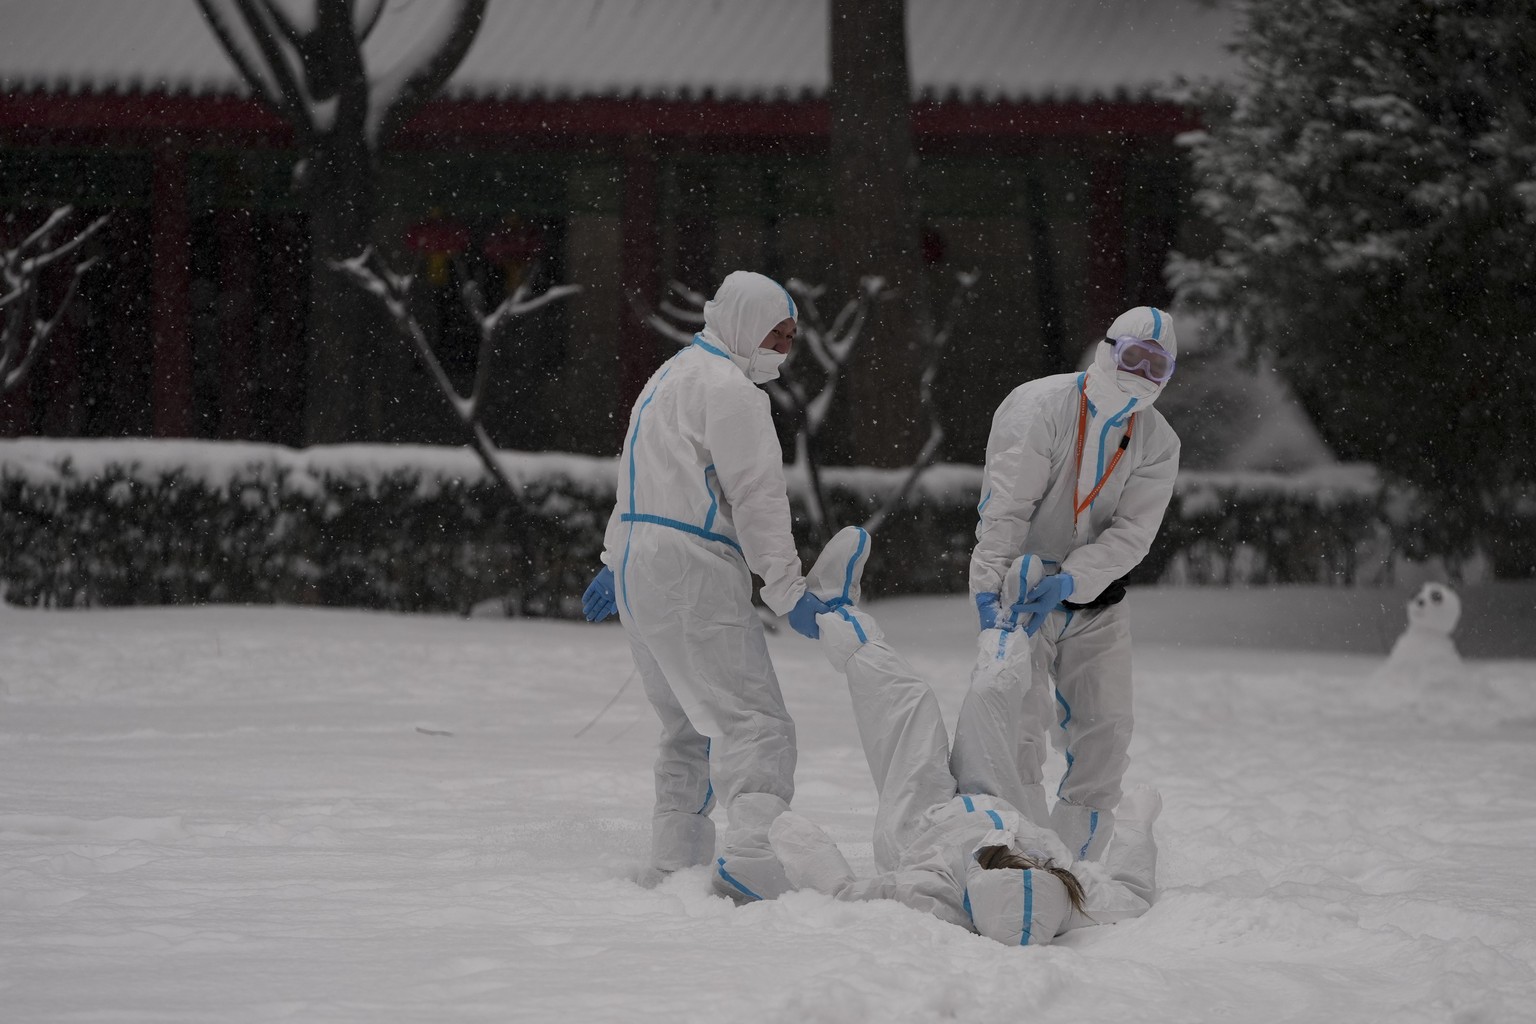 Workers wearing protective suits play outside with snow at the 2022 Winter Olympics, Sunday, Feb. 13, 2022, in Beijing. (AP Photo/Natacha Pisarenko)